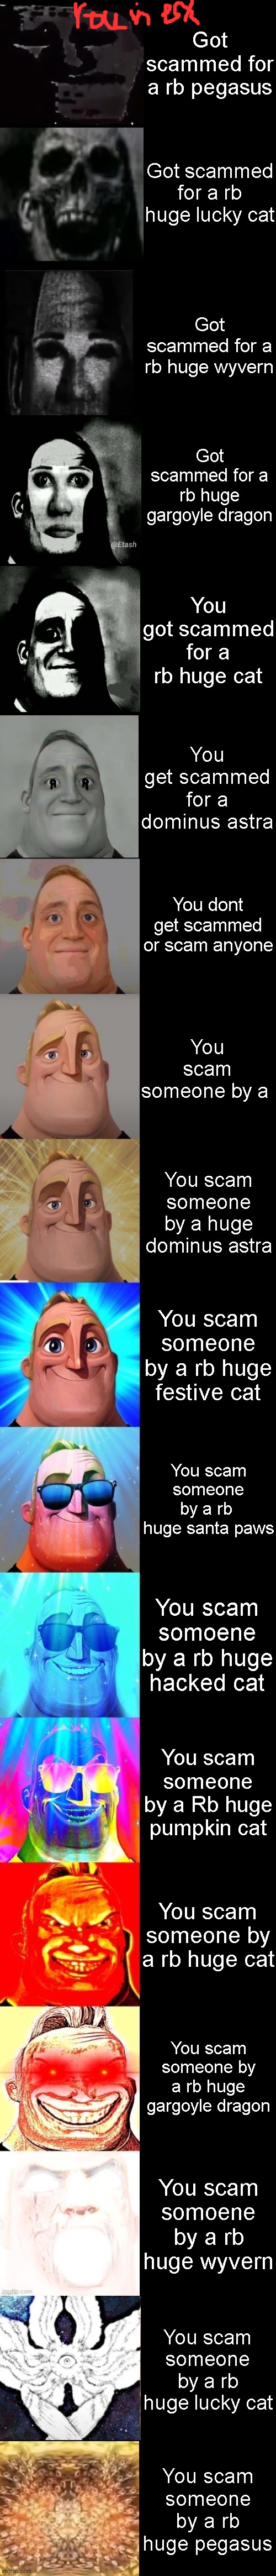 Mr Incredible from Trollge to God | Got scammed for a rb pegasus; Got scammed for a rb huge lucky cat; Got scammed for a rb huge wyvern; Got scammed for a rb huge gargoyle dragon; You got scammed for a rb huge cat; You get scammed for a dominus astra; You dont get scammed or scam anyone; You scam someone by a; You scam someone by a huge dominus astra; You scam someone by a rb huge festive cat; You scam someone by a rb  huge santa paws; You scam somoene by a rb huge hacked cat; You scam someone by a Rb huge pumpkin cat; You scam someone by a rb huge cat; You scam someone by a rb huge gargoyle dragon; You scam somoene by a rb huge wyvern; You scam someone by a rb huge lucky cat; You scam someone by a rb huge pegasus | image tagged in mr incredible from trollge to god | made w/ Imgflip meme maker